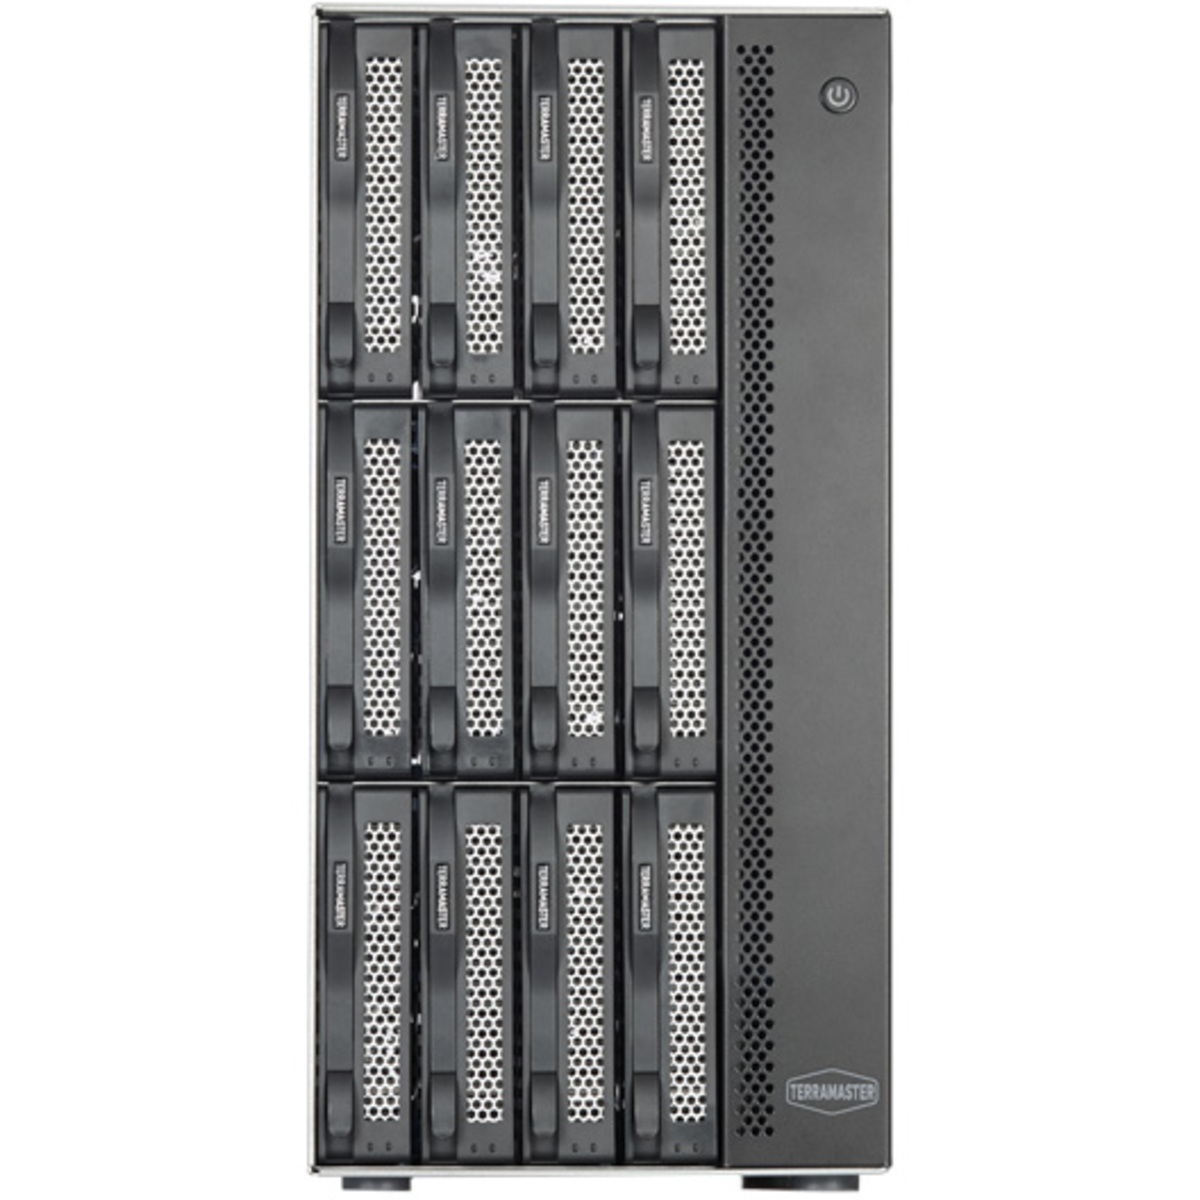 TerraMaster T12-450 288tb 12-Bay Desktop Multimedia / Power User / Business NAS - Network Attached Storage Device 12x24tb Seagate IronWolf Pro ST24000NT002 3.5 7200rpm SATA 6Gb/s HDD NAS Class Drives Installed - Burn-In Tested T12-450